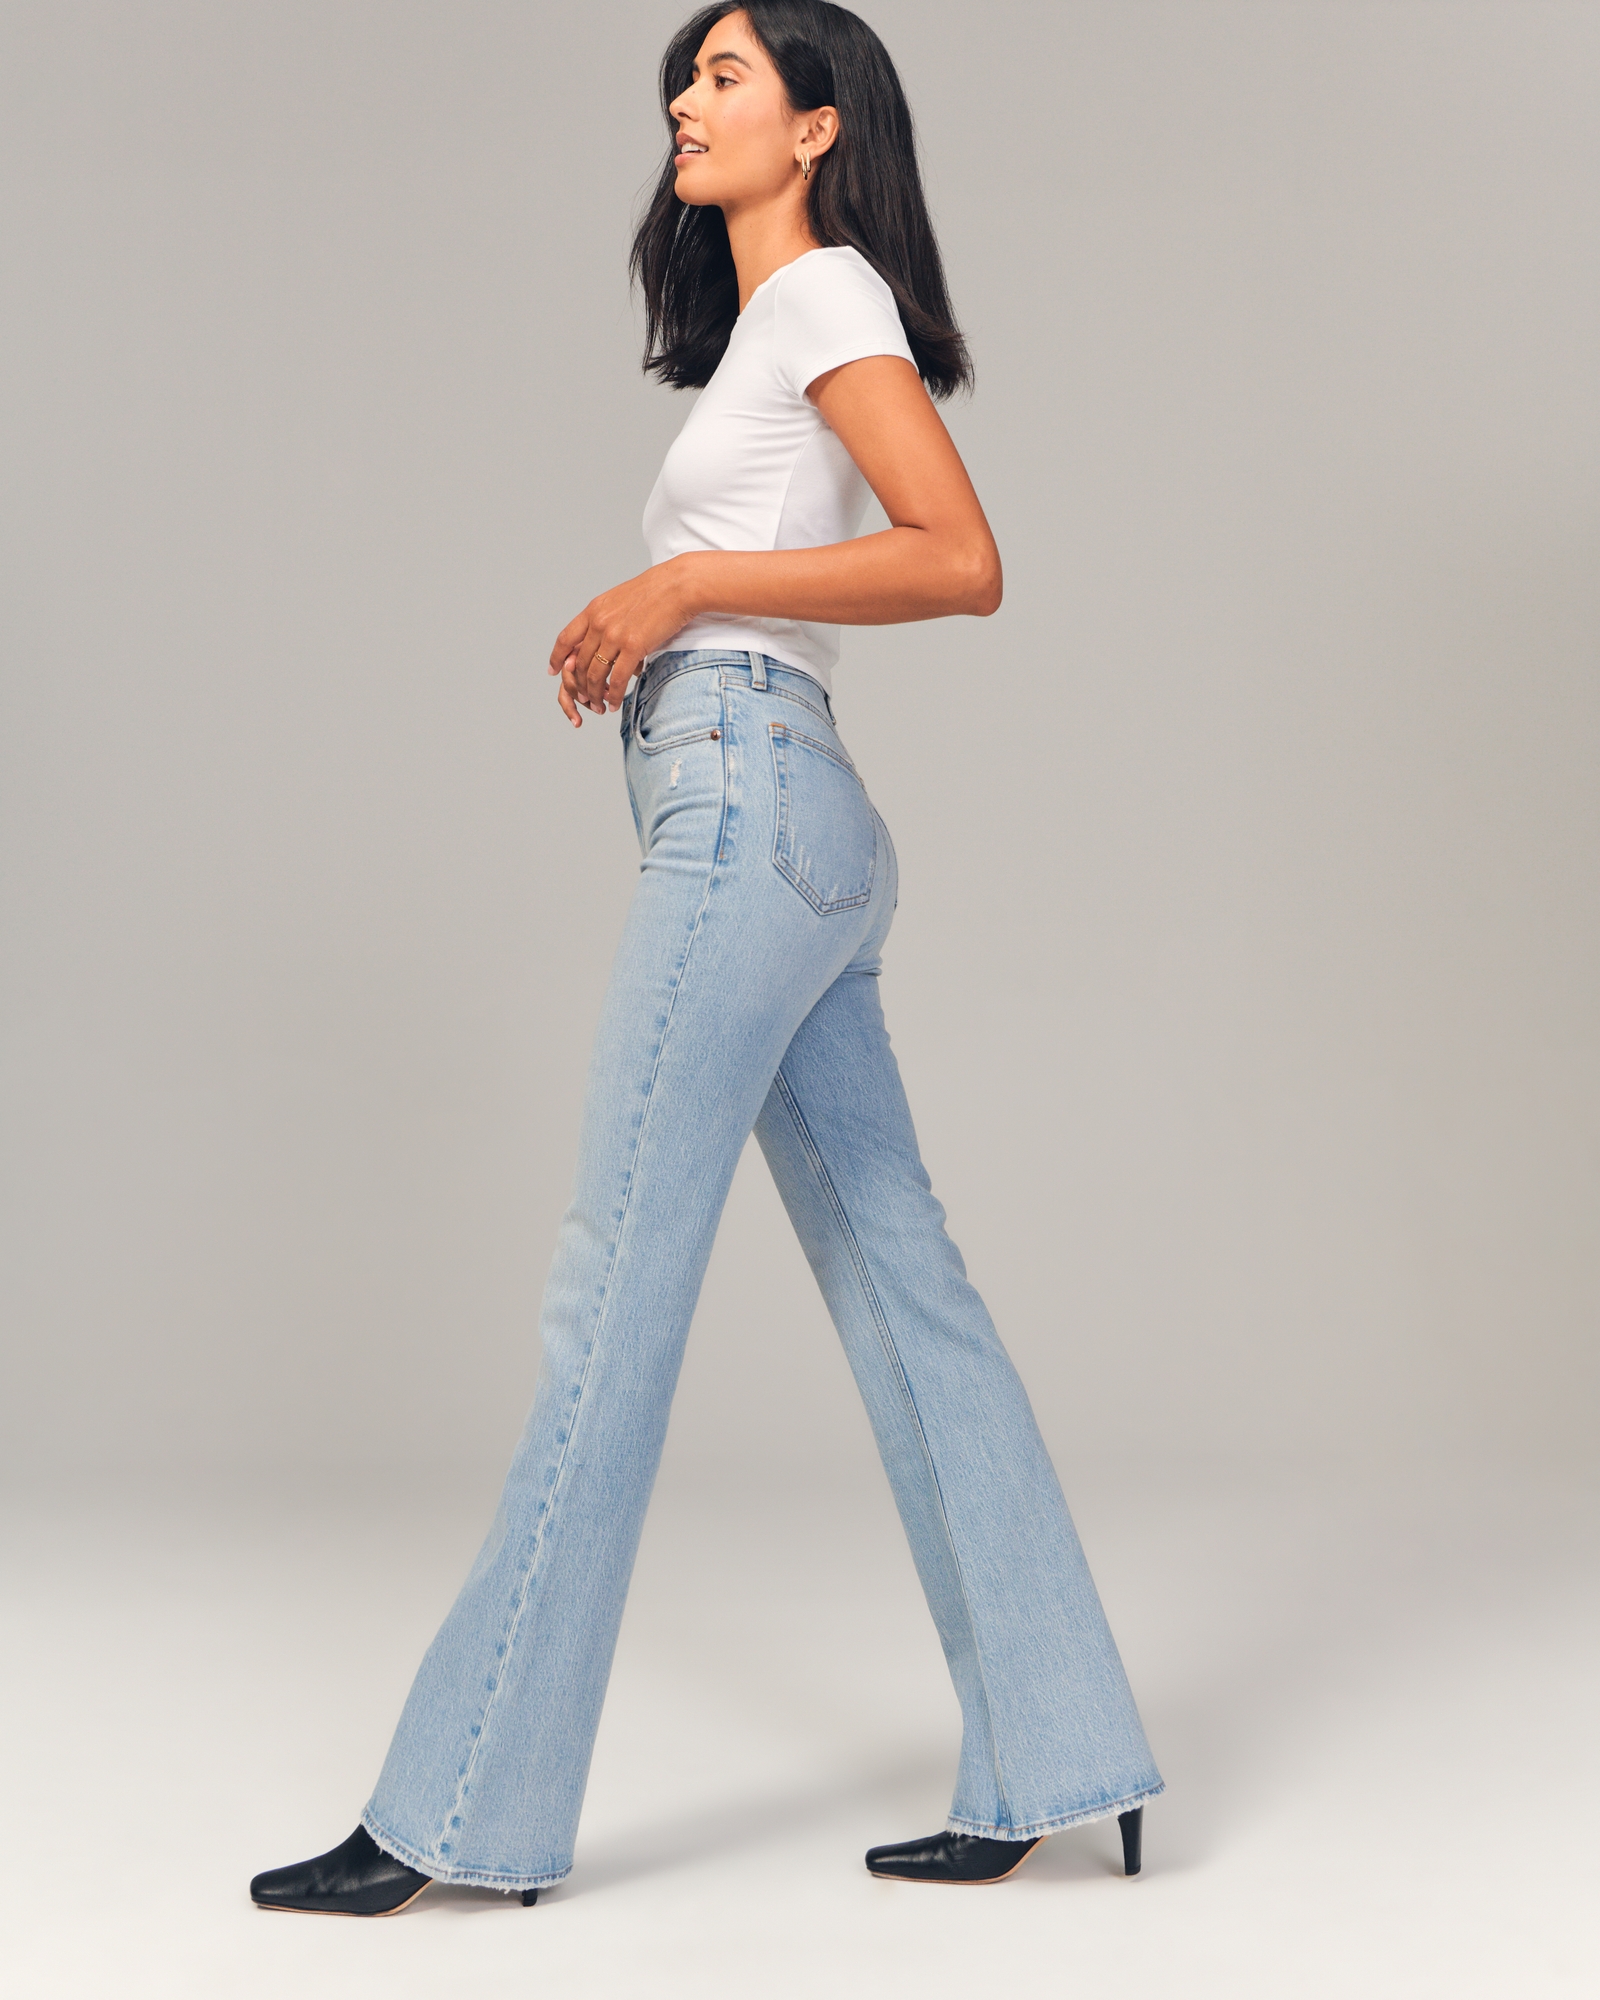 Buy 90s High Waist Flare Jeans - Shoptery